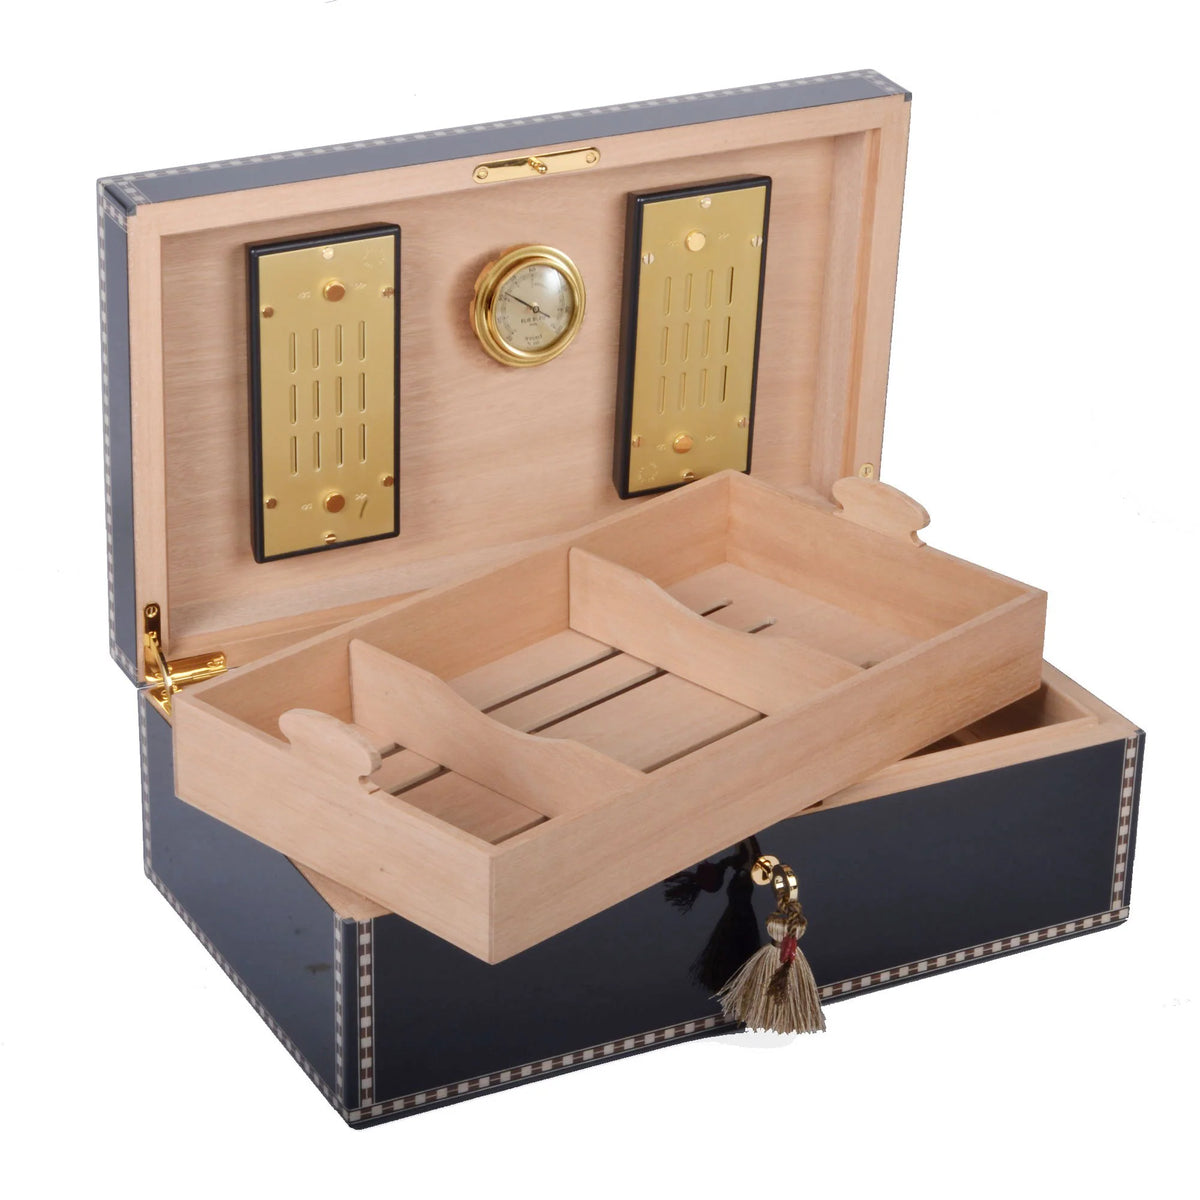 A black and gold Elie Bleu Black Sycamore "Medals" Humidor - 120 Cigars decorated with a tassel, made by Elie Bleu.